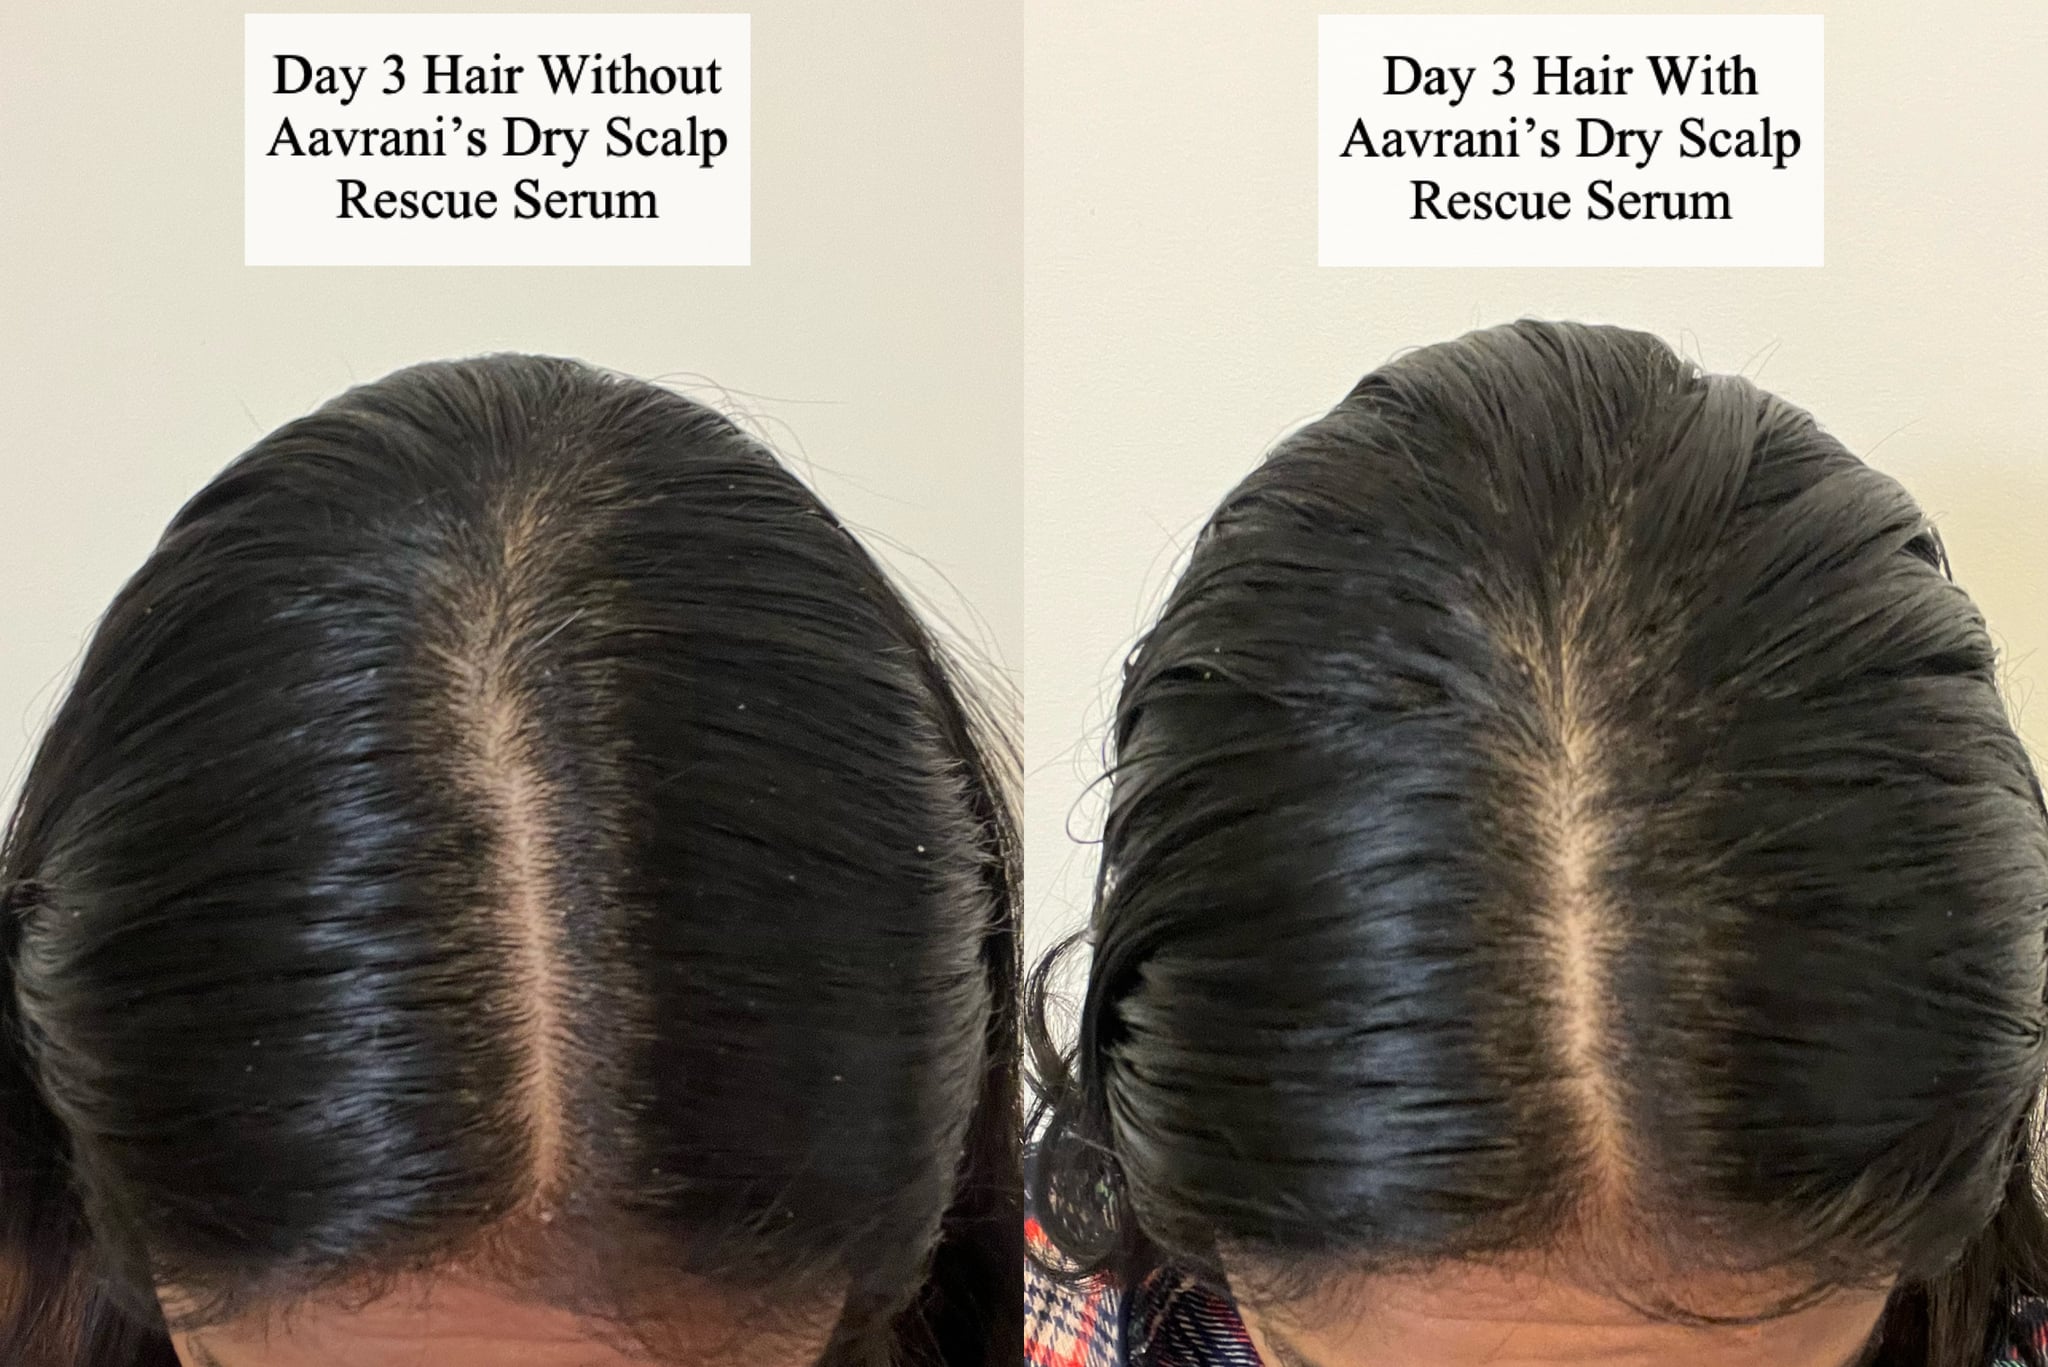 Before and after using the Aavrani Anti-Dandruff Dry Scalp Rescue Serum.